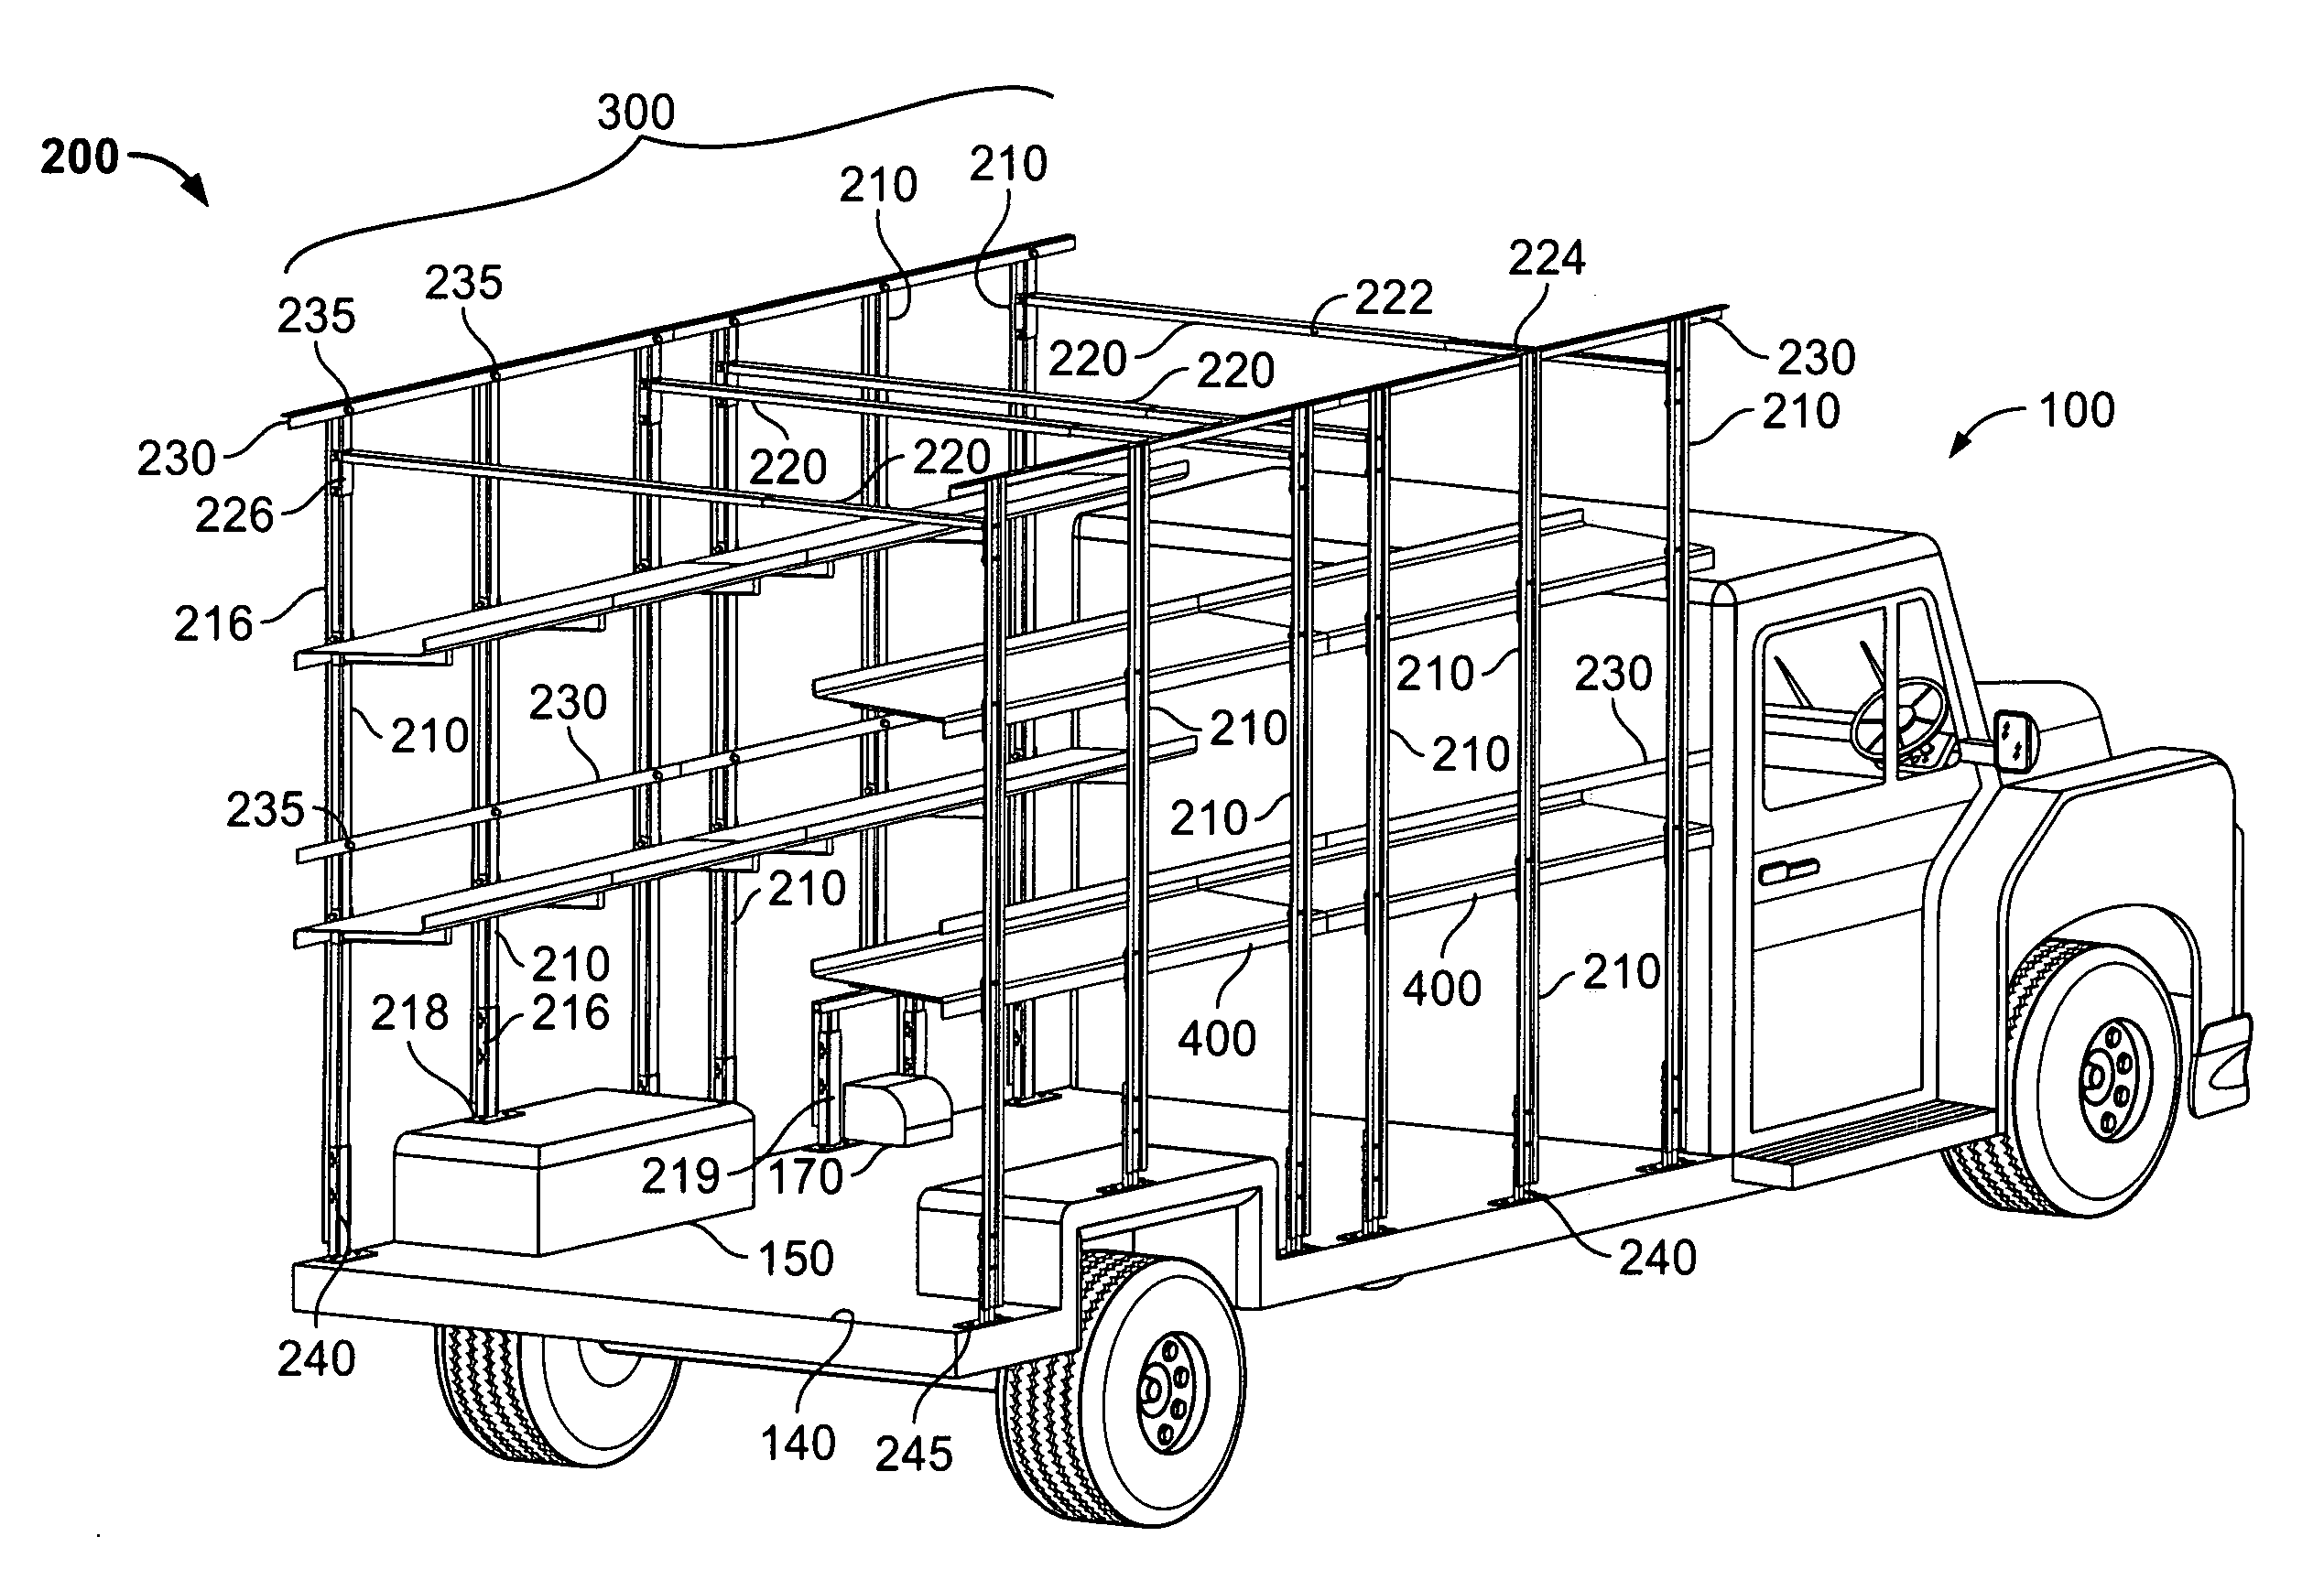 Frame for building a vehicular body with a load bearing support system